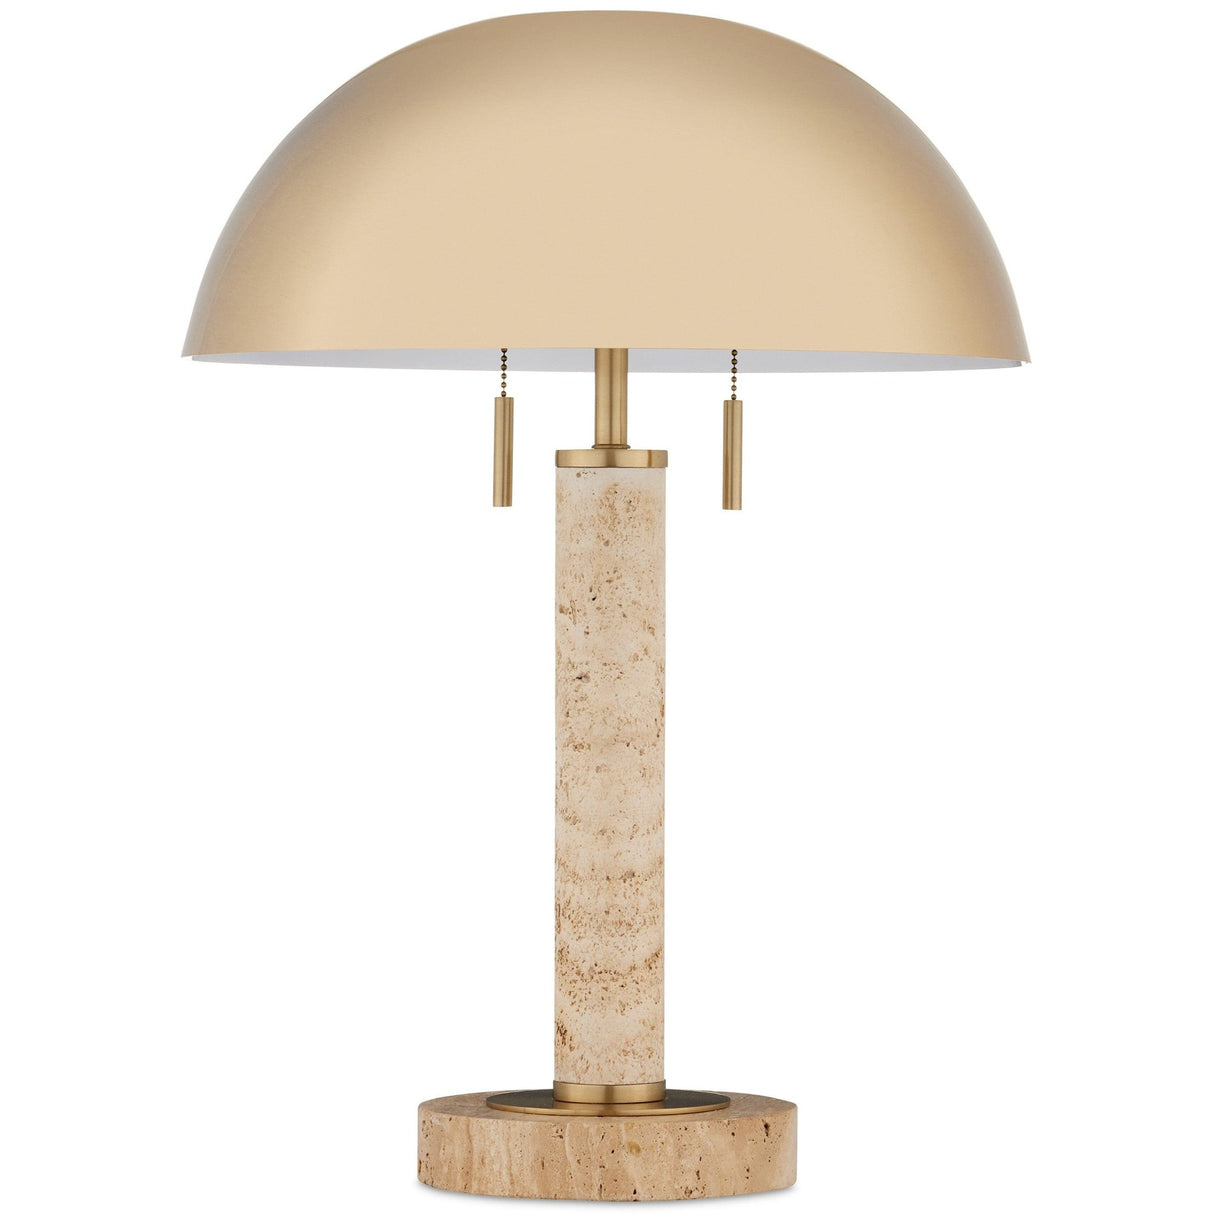 Currey & Company Miles Table Lamp Table Lamps currey-co-6000-0914